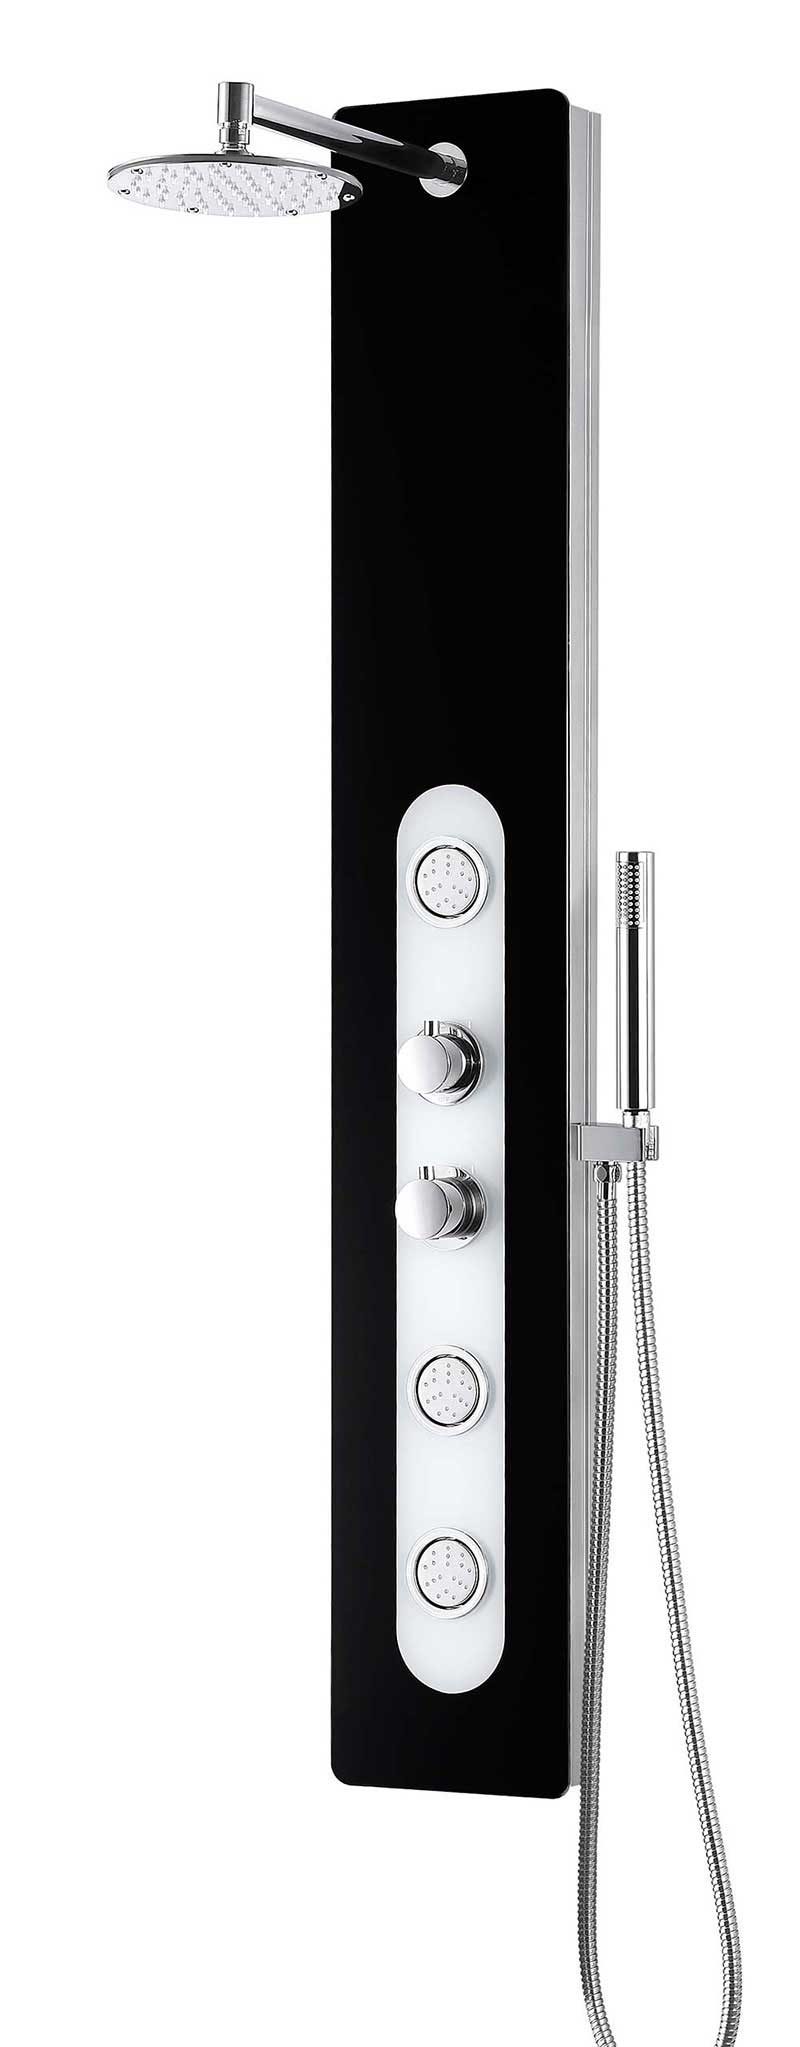 Anzzi LANDE Series 56 in. Full Body Shower Panel System with Heavy Rain Shower and Spray Wand in Black